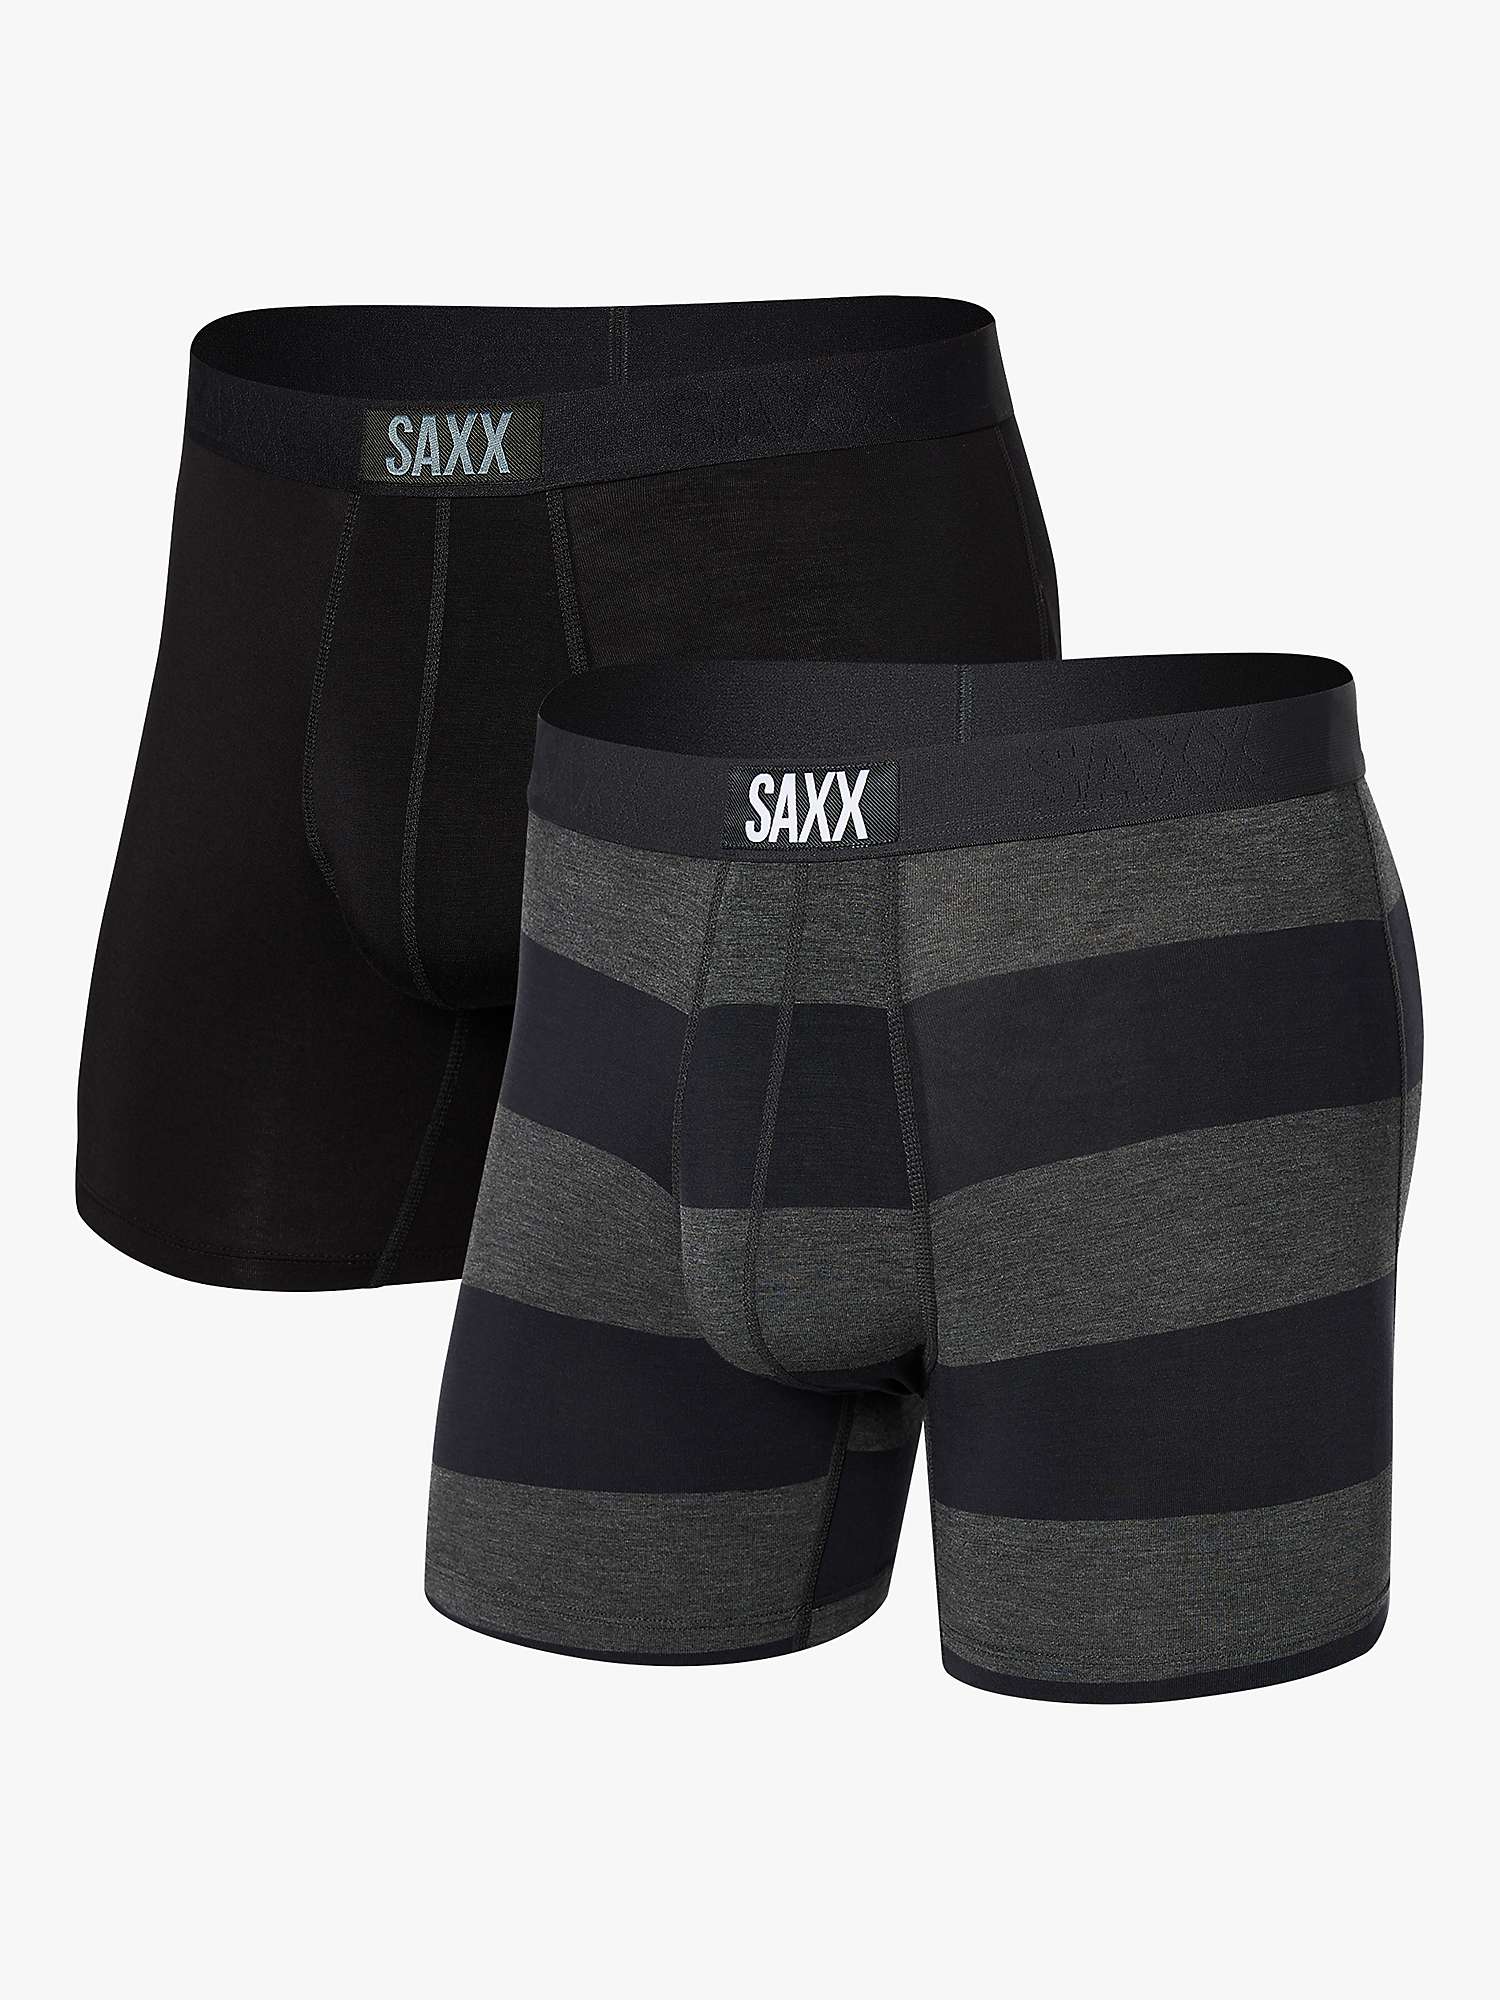 Buy SAXX Rugby Stripe Trunks, Pack of 2, Black Online at johnlewis.com